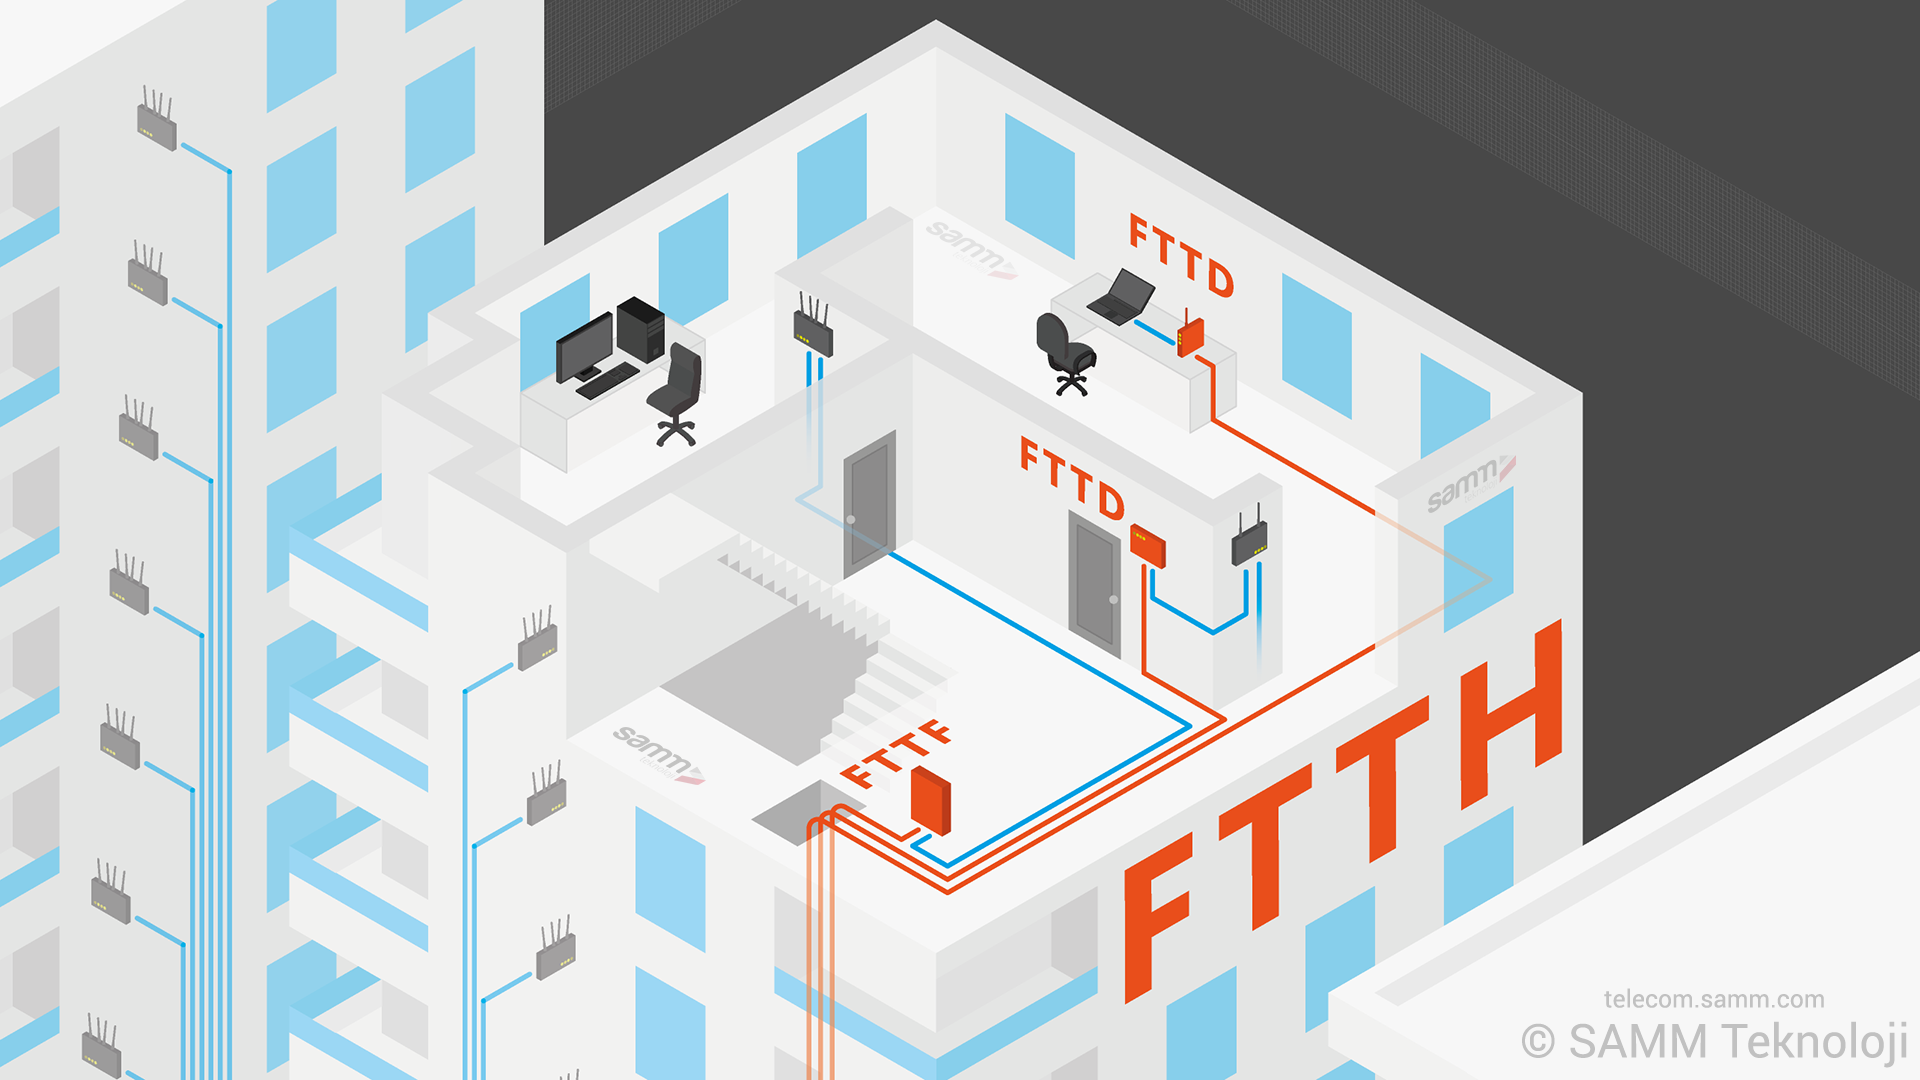 Fiber to the X Network Architecture, FTTH (Fiber to the Home or House), FTTF (Fiber to the Floor, Frontage, Farm, Factory or Feeder) and FTTD (Fiber to the Desk or Fiber to the Door)